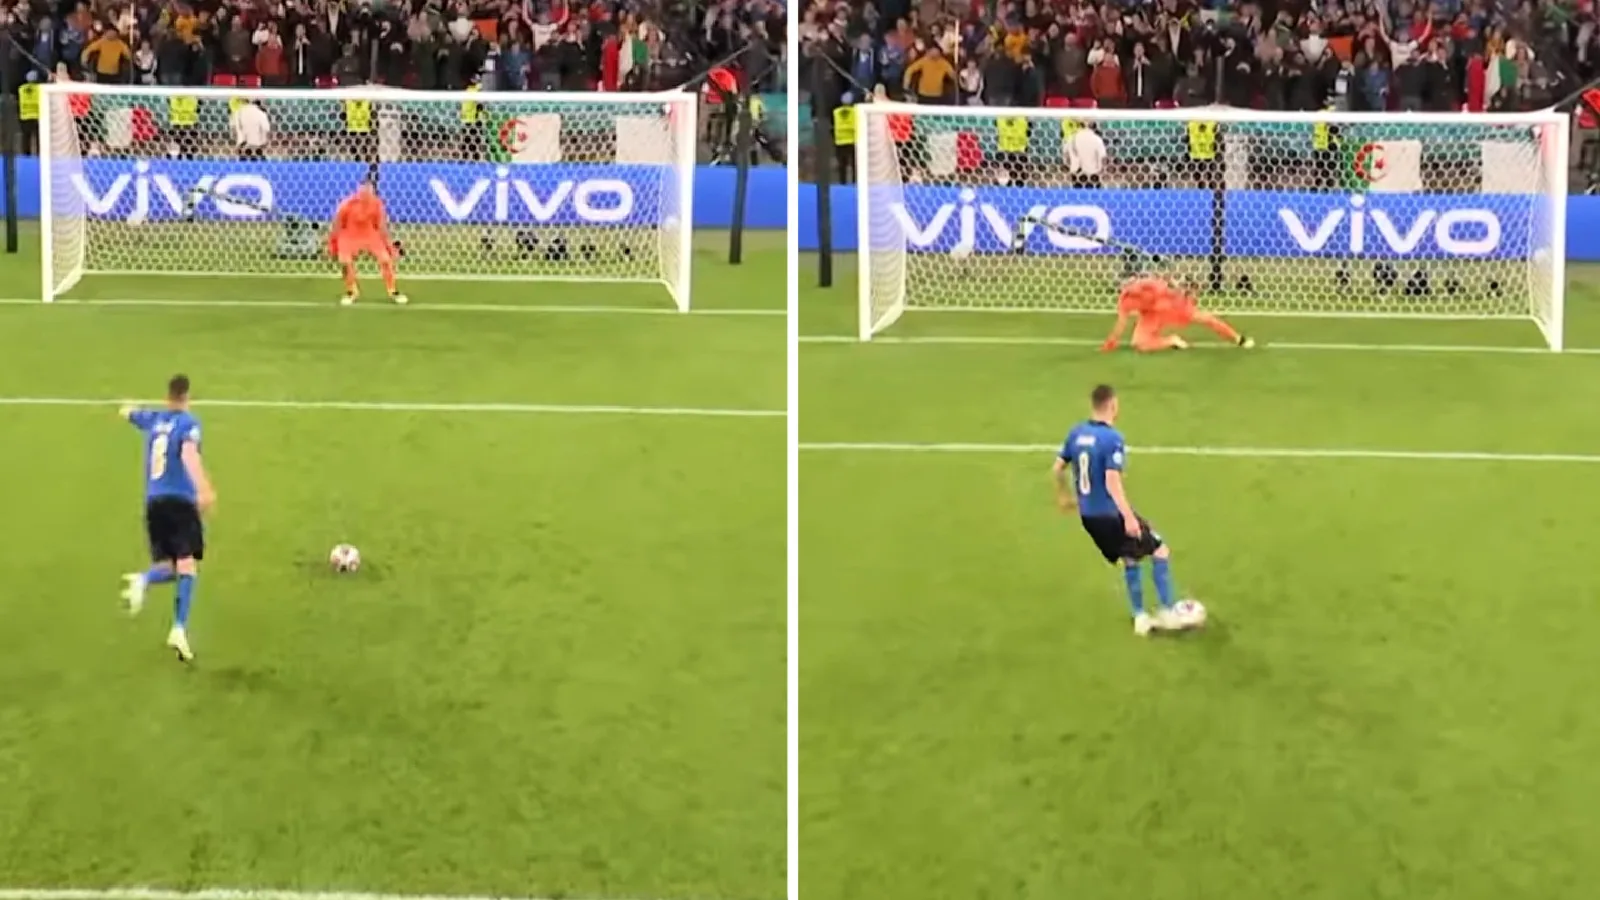 Jorginho sends Unai Simon in the wrong direction to win Italy's semi final game against Spain